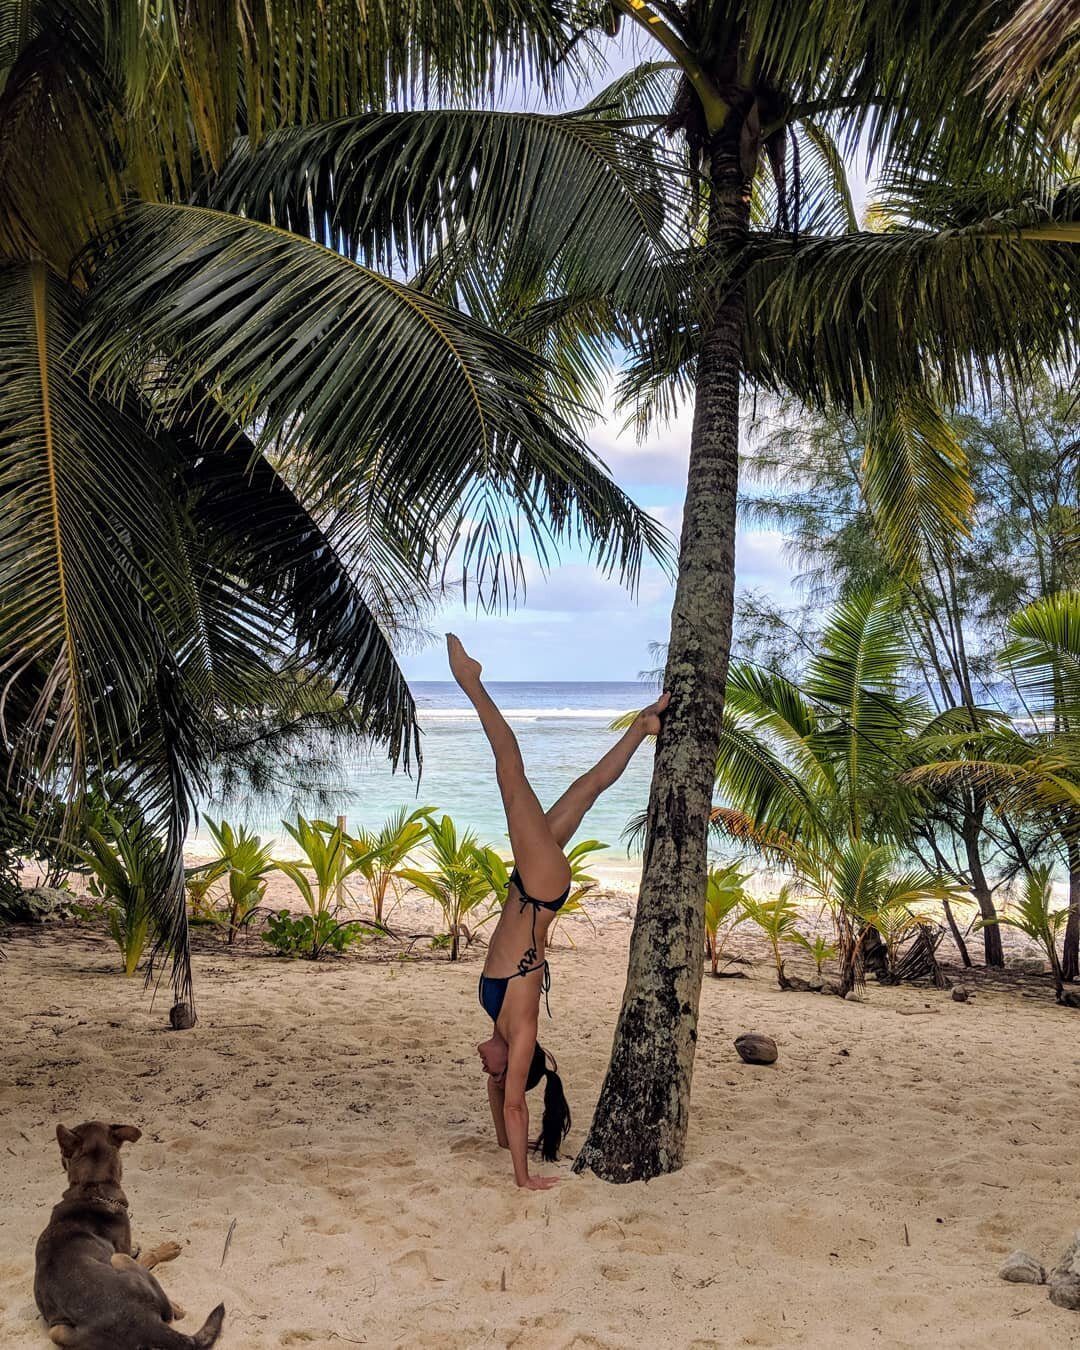 Surviving Sydney winter. A weekend of connecting and disconnecting. Filling my cup to the brim. Adventure days, belly laughs and balmy nights 🌴 Back in Sydney soon! #escapewinter #familyholidays #handstandinparadise